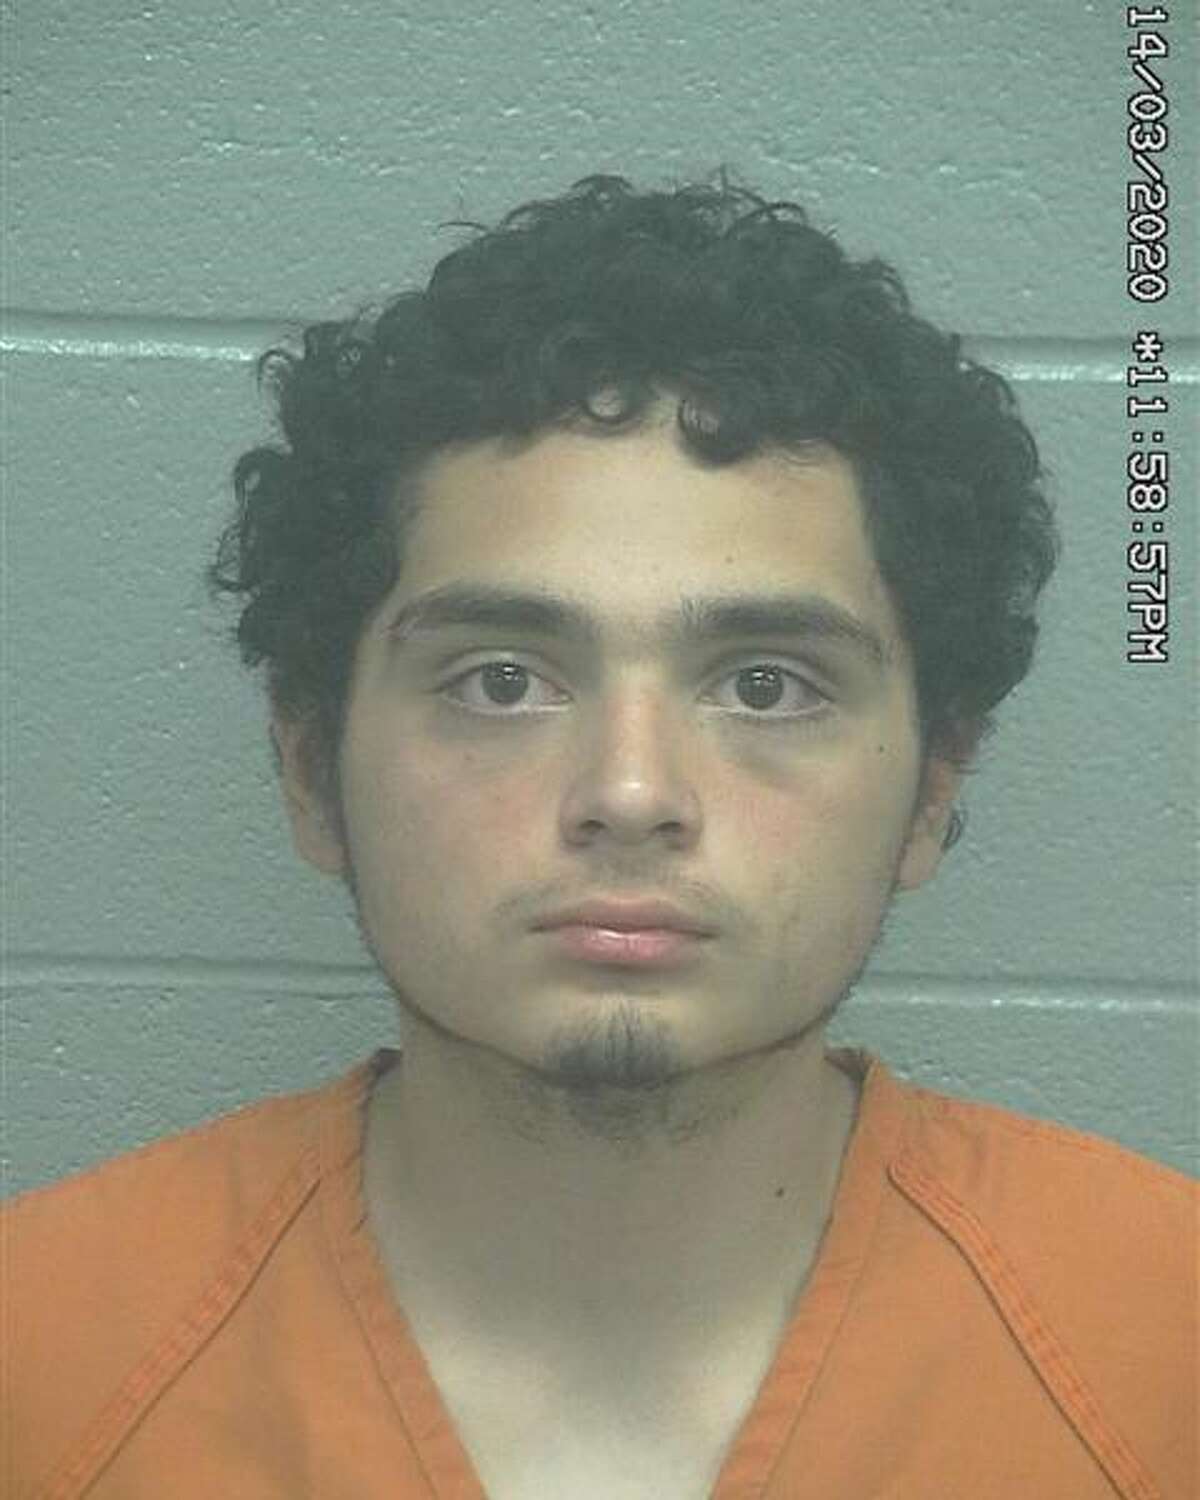 Jose Gomez III was sentenced to 25 years in prison on hate crime charges, according to the United States Attorney’s Office Western District of Texas.